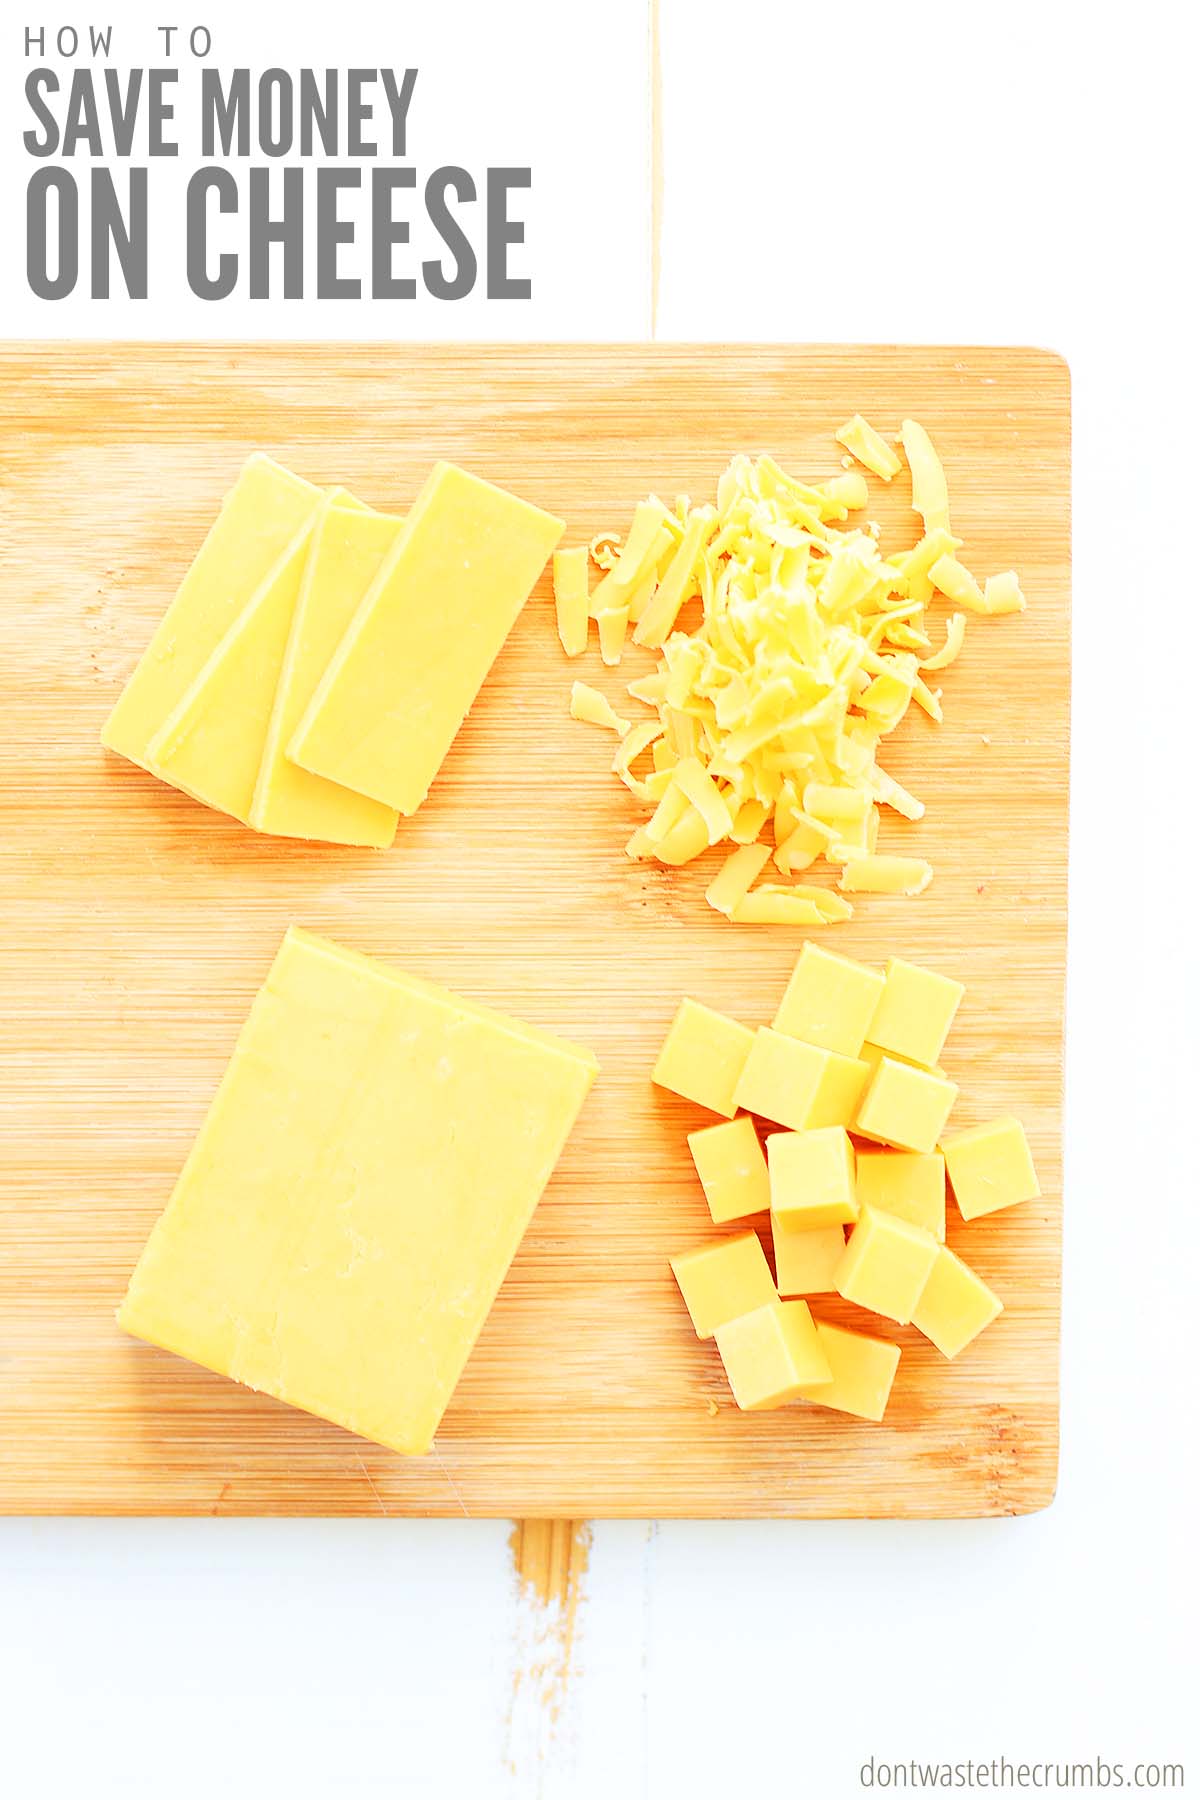 Four sliced pieces of cheese, shredded cheese, a block of cheese, and cubed pieces of cheese on a wooden cutting board. Text overlay "How to Save Money on Cheese."